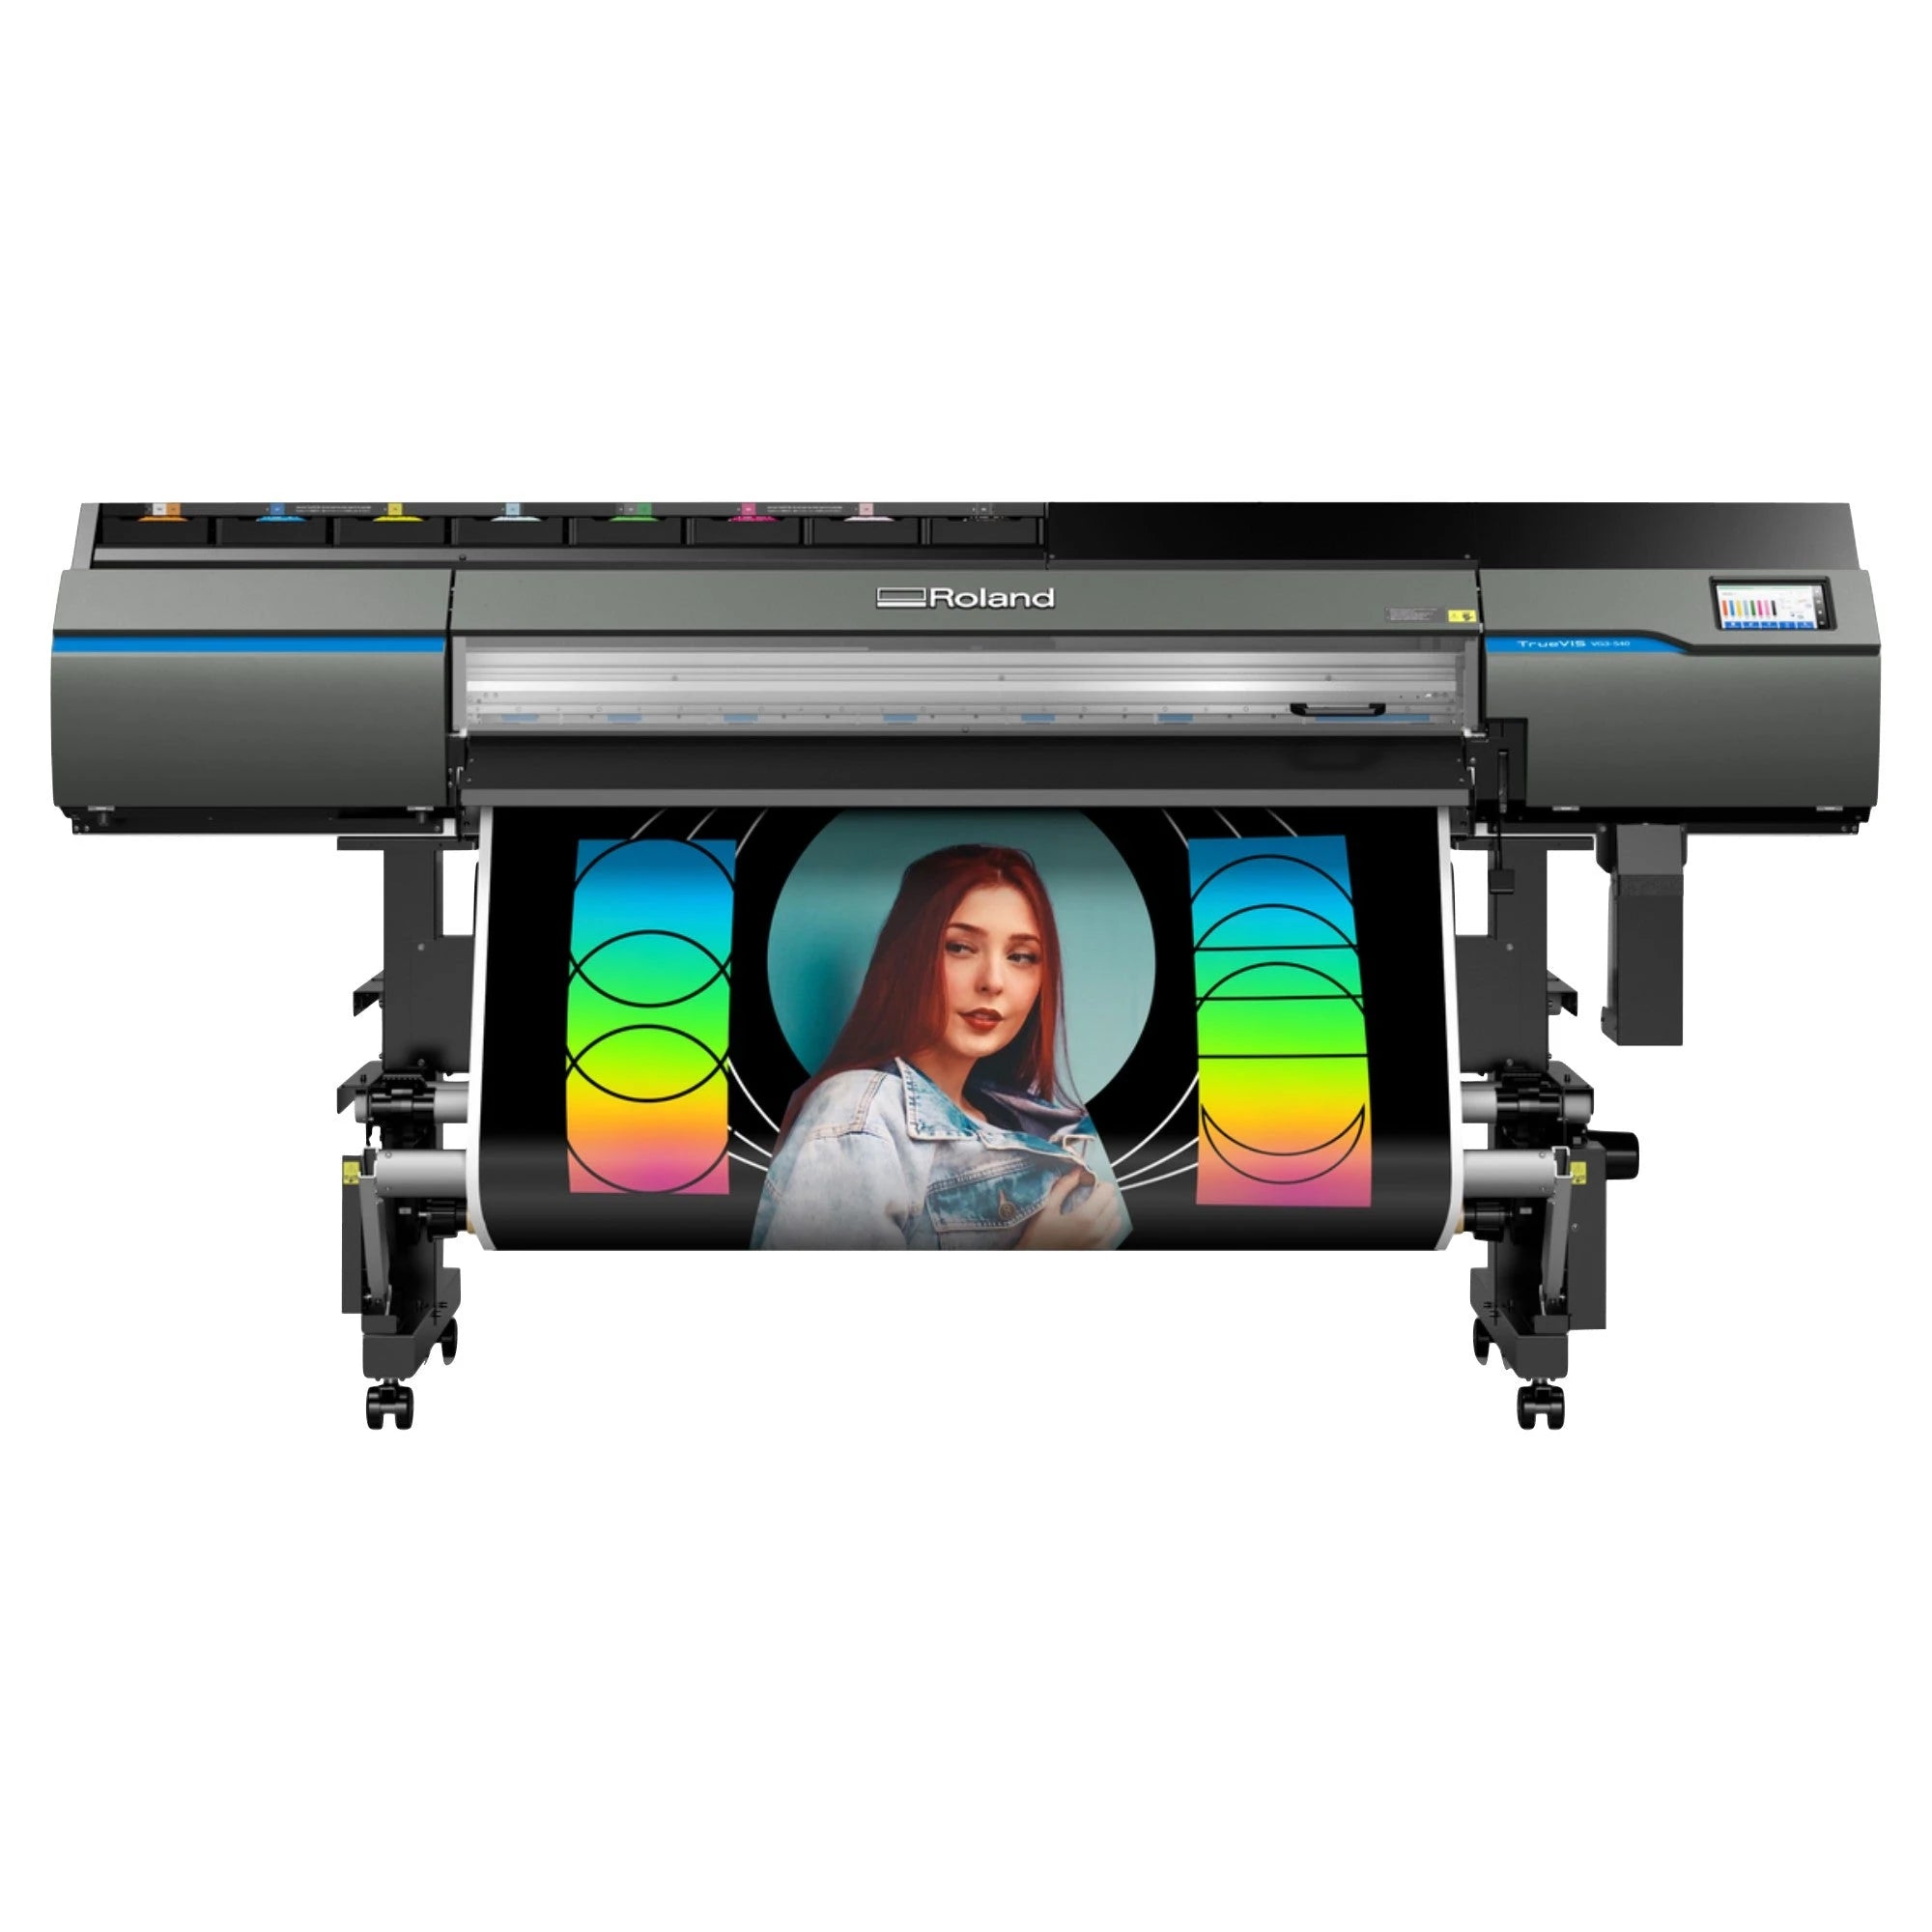 Absolute Toner $299/Month Roland DG TrueVIS VG3-540 54" Inches, Wide Format Inkjet Printer/Cutter (Print and Cut) With 7" LCD Touchscreen - Sale By Absolute Toner In Canada Large Format Printer